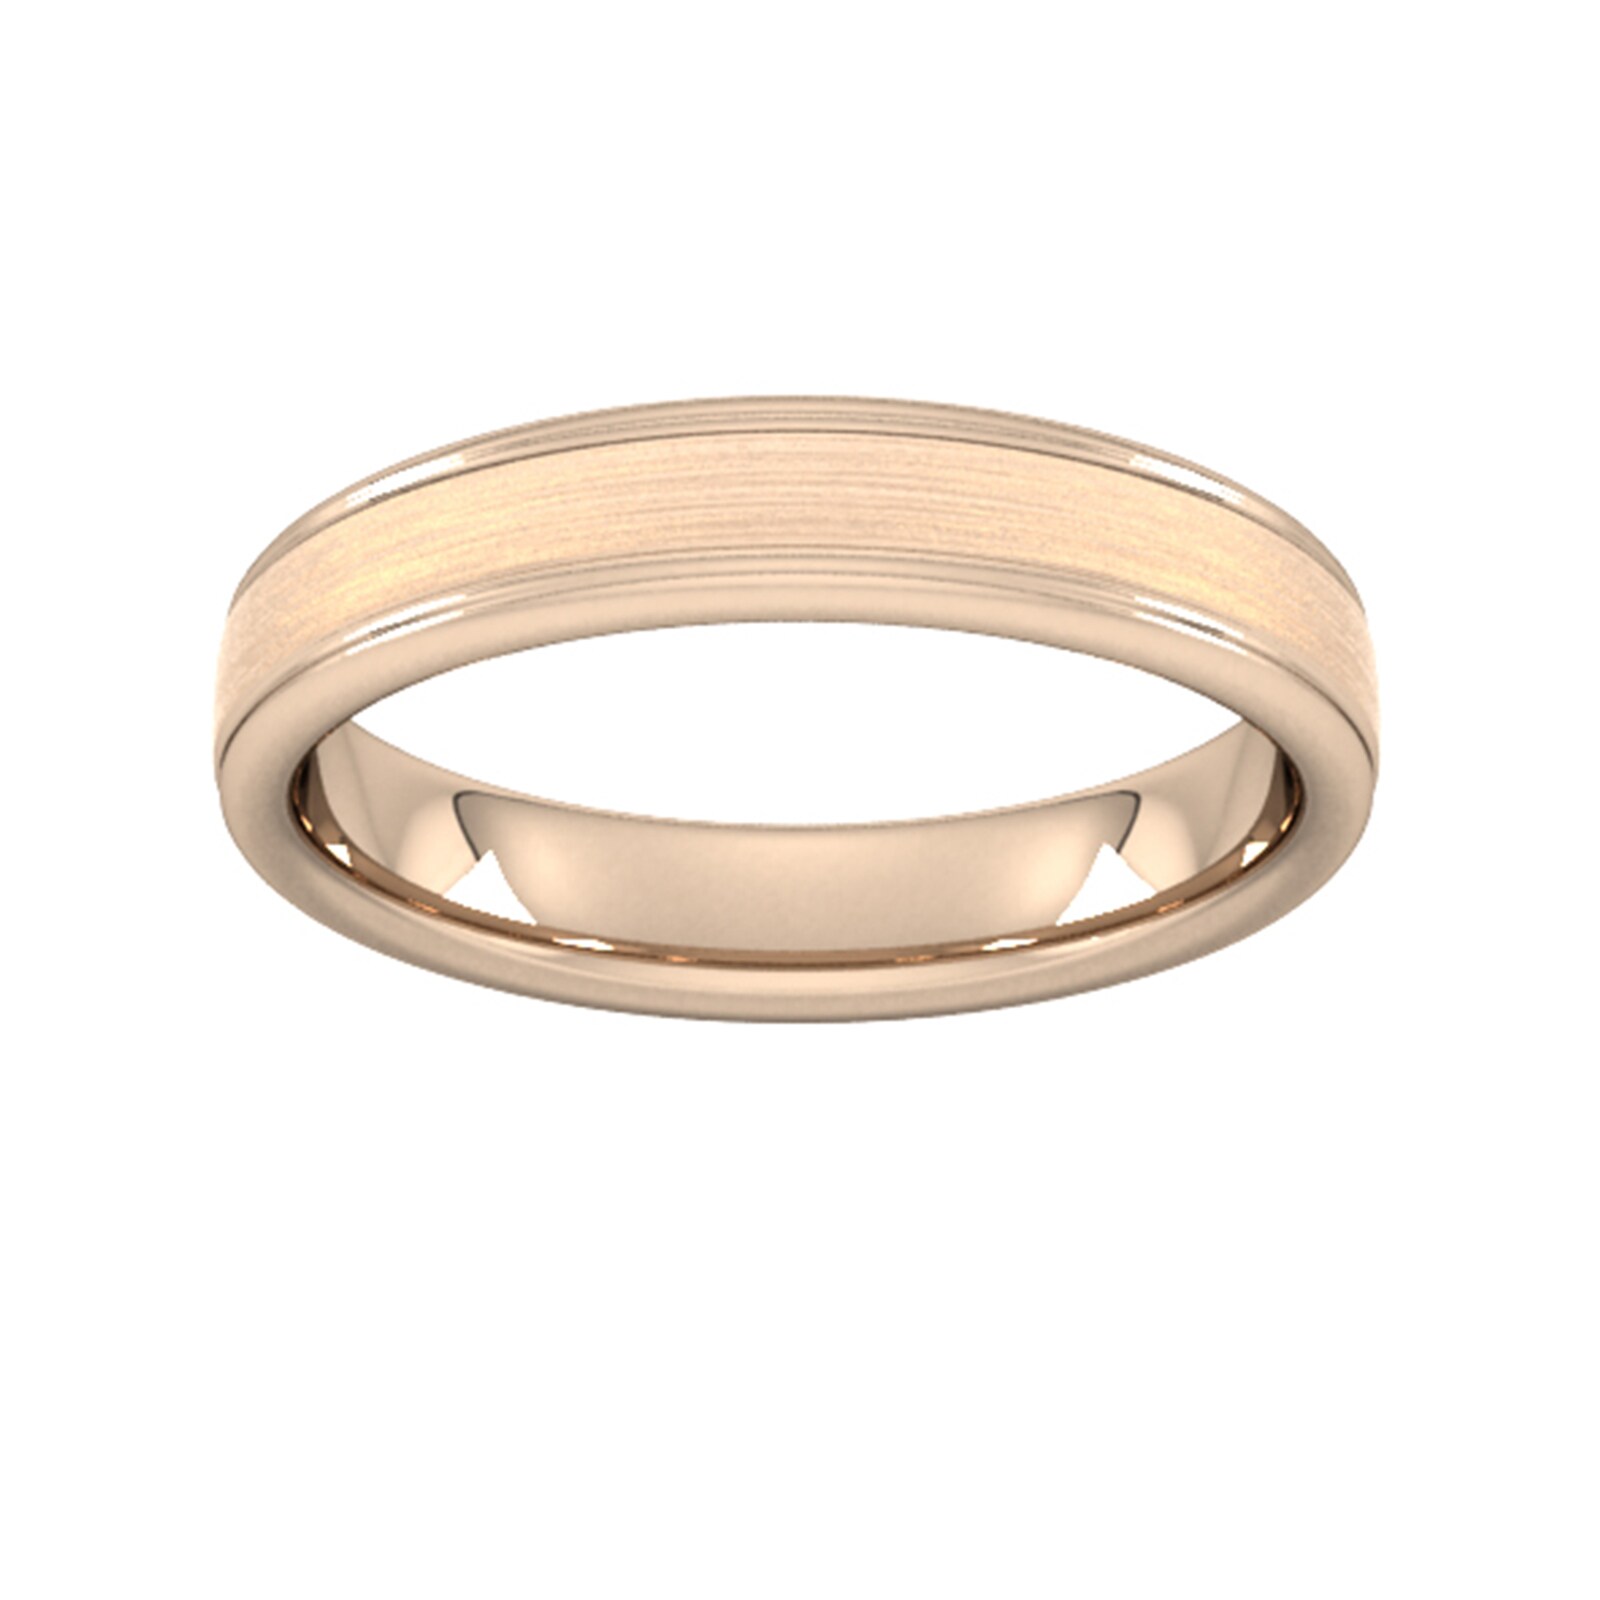 4mm Slight Court Heavy Matt Centre With Grooves Wedding Ring In 9 Carat Rose Gold - Ring Size L